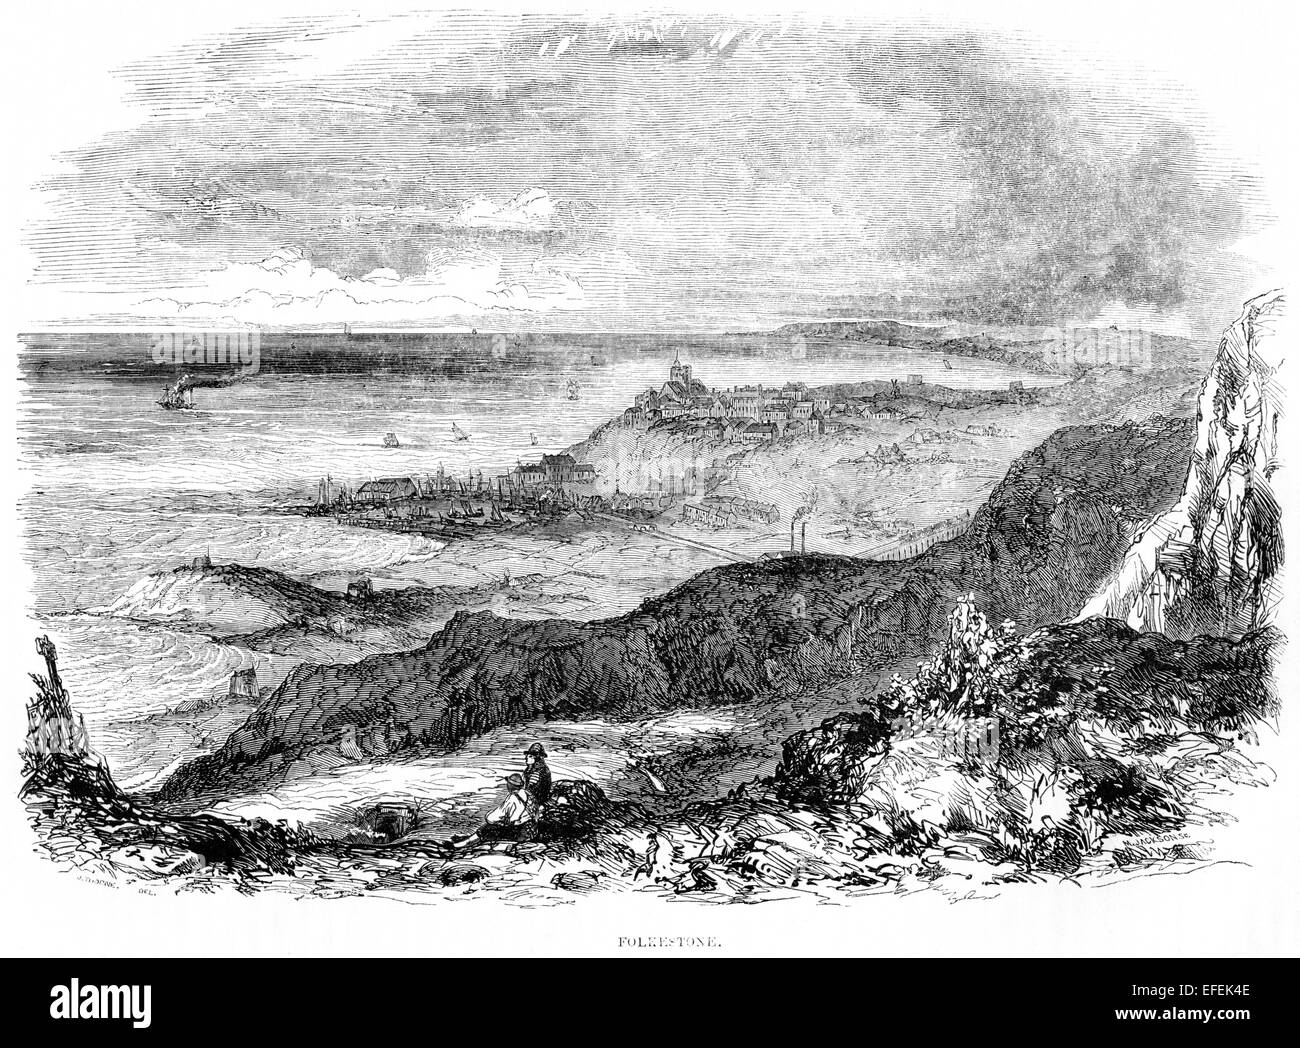 An engraving of Folkestone scanned at high resolution from a book printed in 1850. Stock Photo